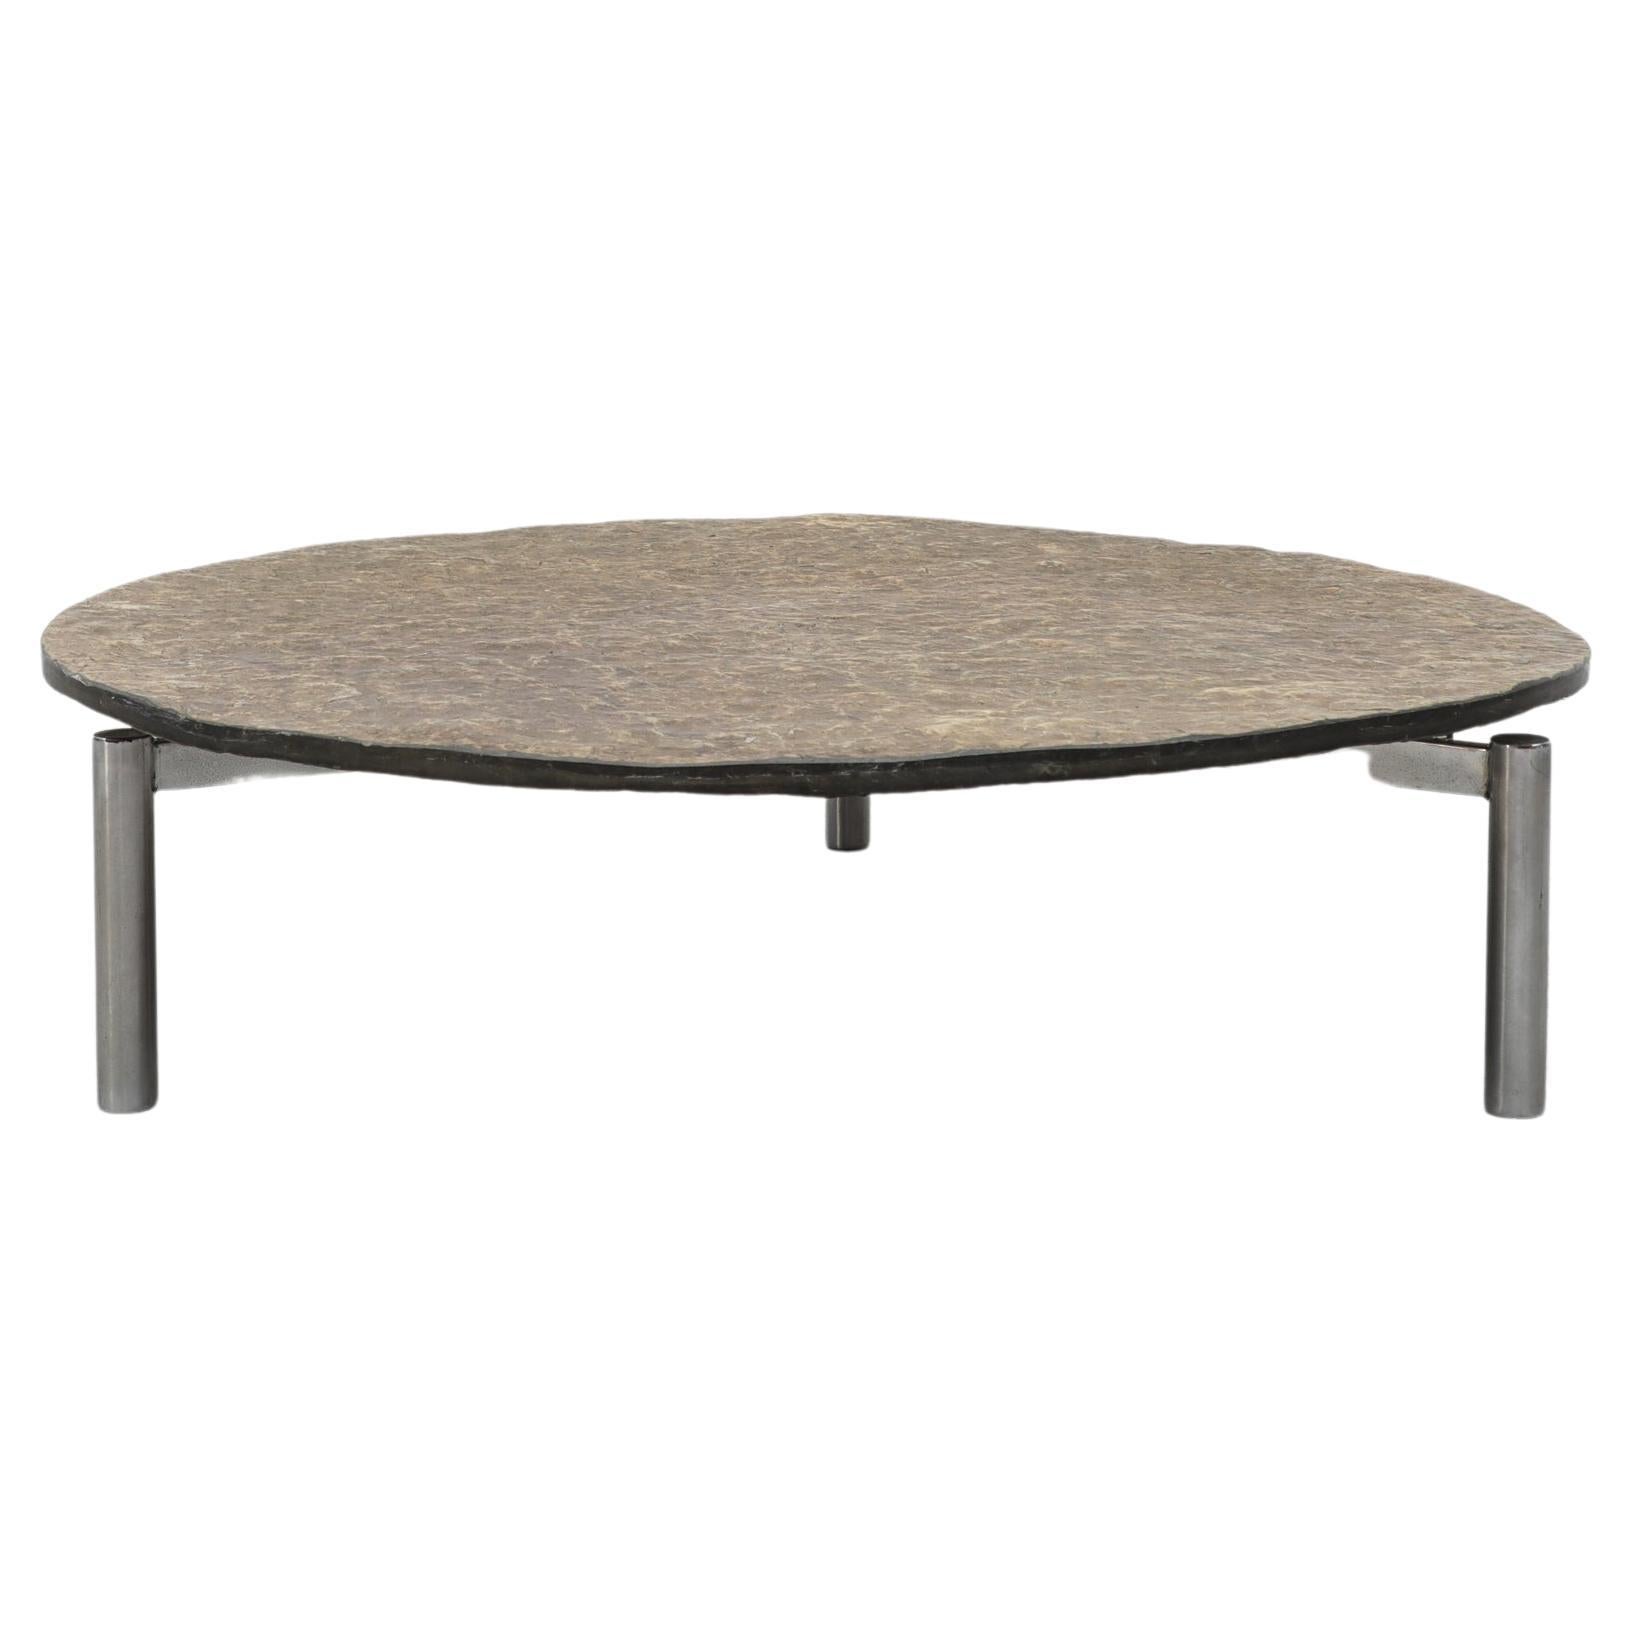 Giant Poul Kjerholm Inspired Stone and Chrome Coffee Table